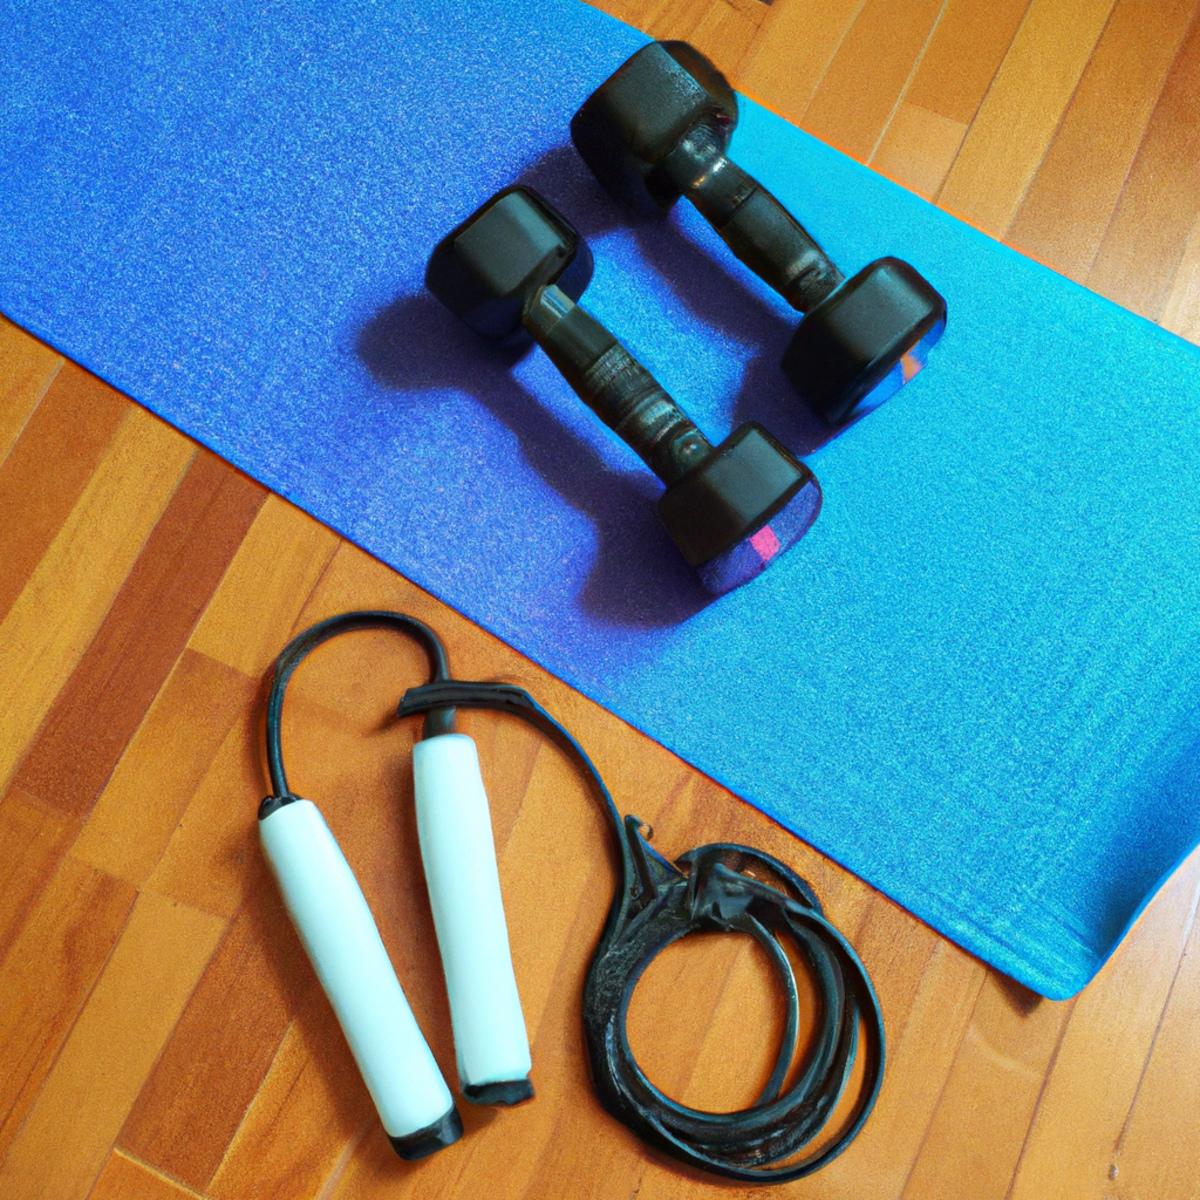 The photo features a set of dumbbells, a jump rope, and a yoga mat neatly arranged on a hardwood floor. The dumbbells are of varying weights, ranging from 5 to 20 pounds, and are placed on either side of the yoga mat. The jump rope is coiled up and placed on top of the mat, while the mat itself is rolled up and leaning against the wall in the background. The lighting is bright and natural, casting a warm glow on the objects and highlighting their textures and details. The overall effect is one of simplicity and efficiency, conveying the message that these basic tools are all that's needed for a highly effective HIIT workout.